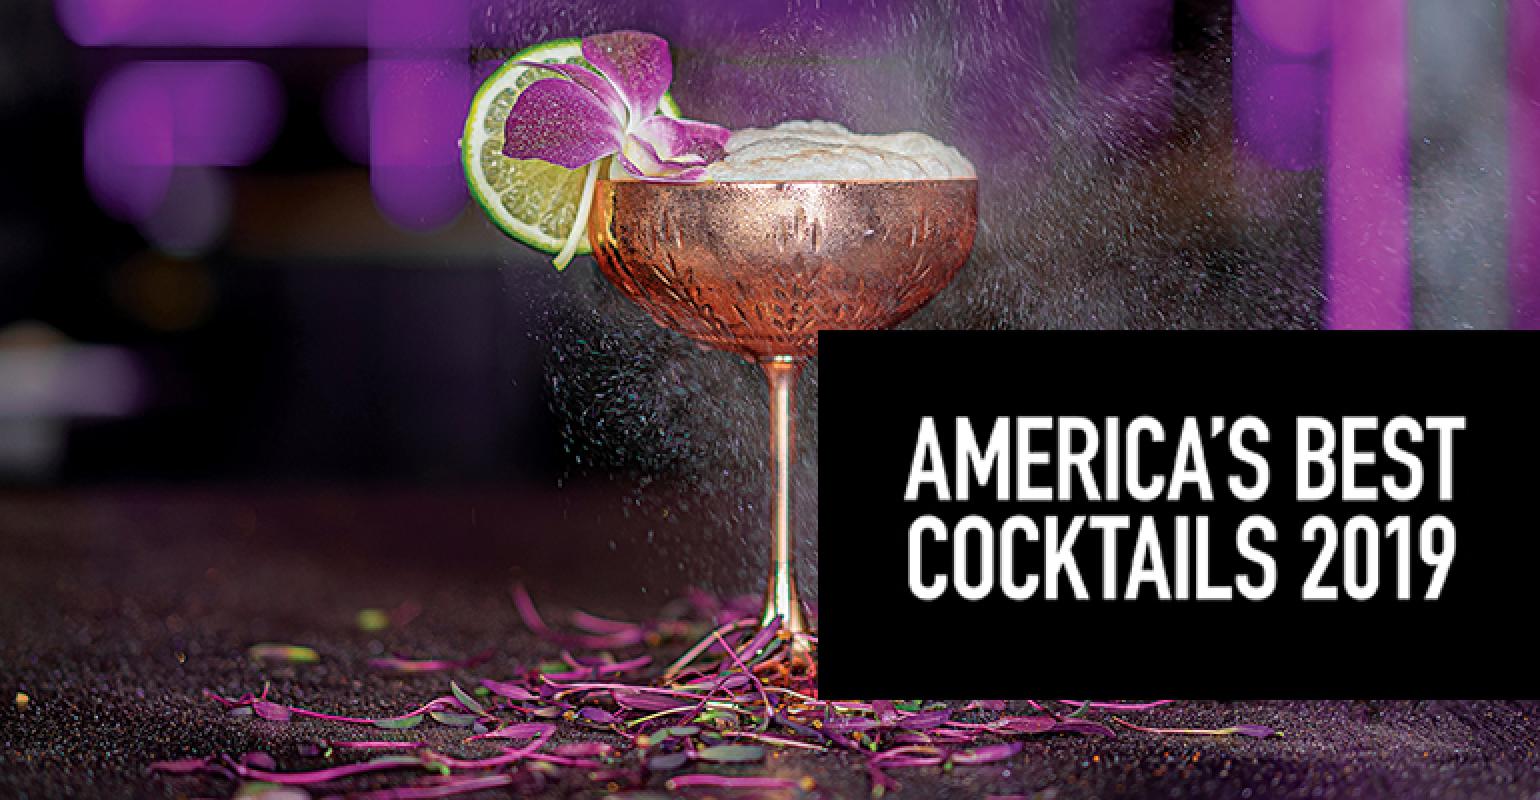 America's Best Cocktails 2019 |